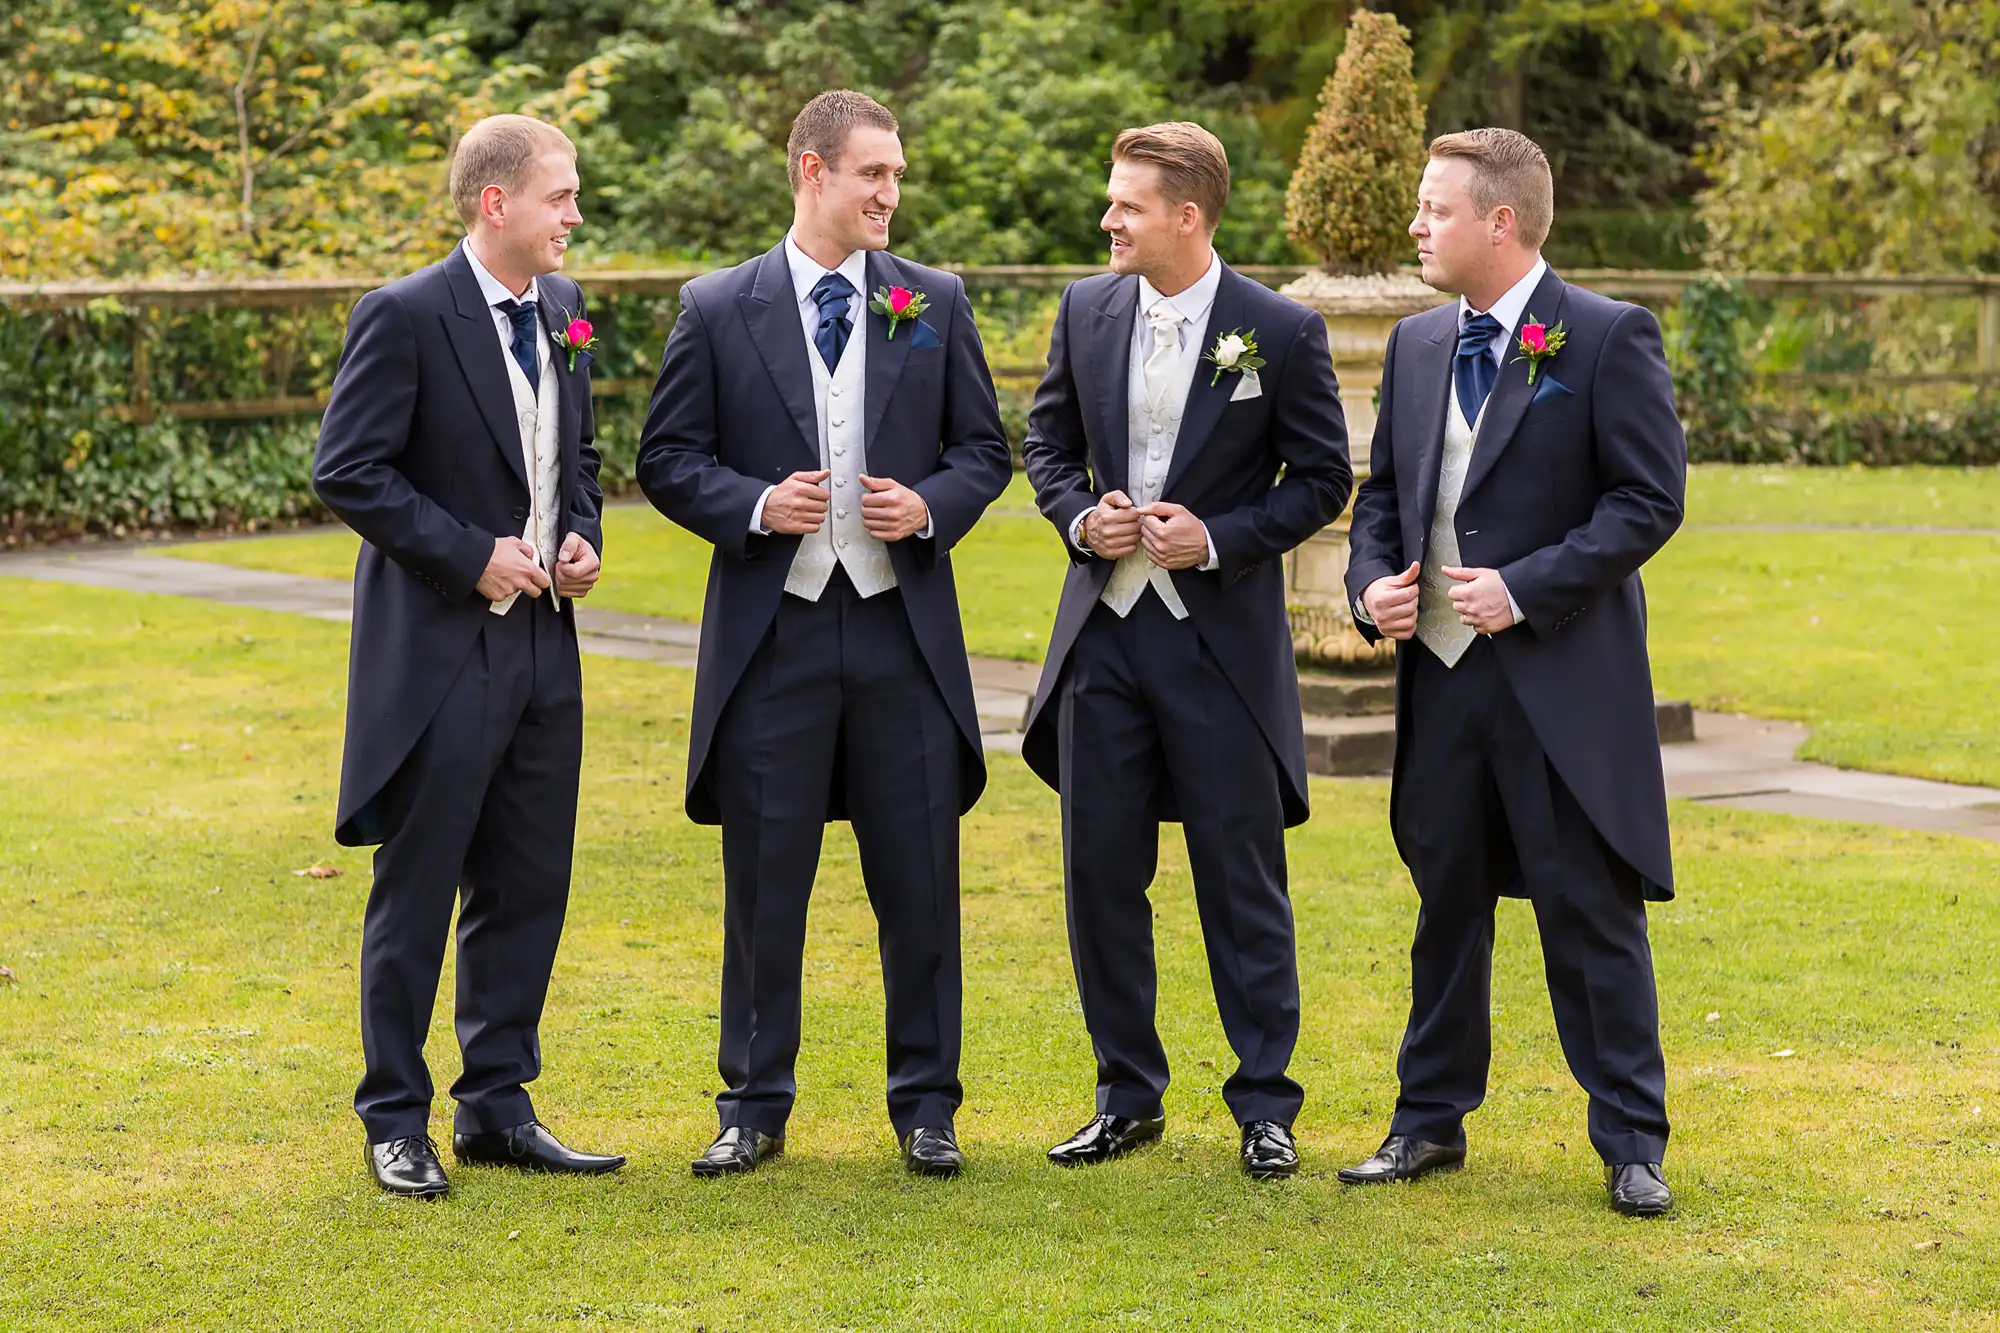 Four men in suits, one wearing a boutonniere, conversing in a garden setting with a gentle smile.